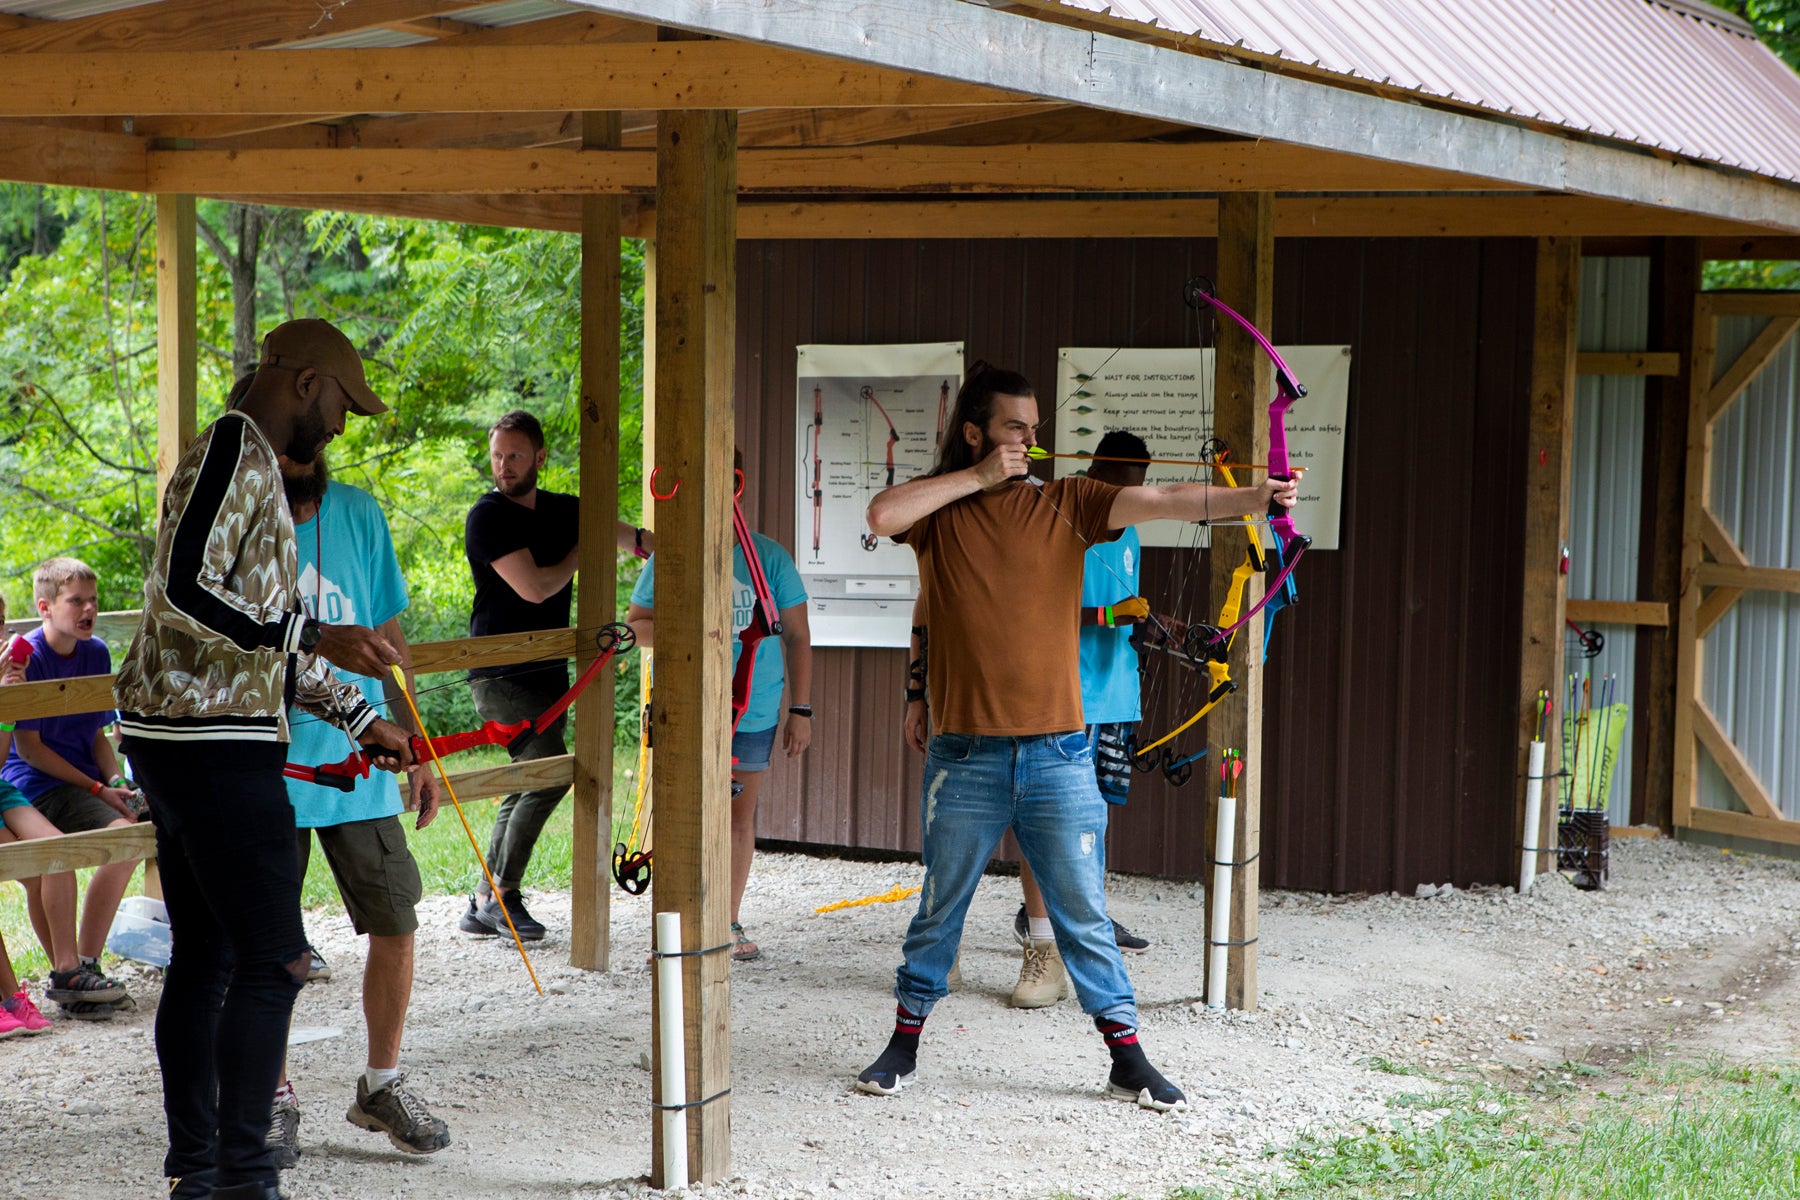 Jonathan prepares to shoot an arrow with a bow at an archery range in an episode of Queer Eye. Karamo, Bobby, and campers stand nearby.